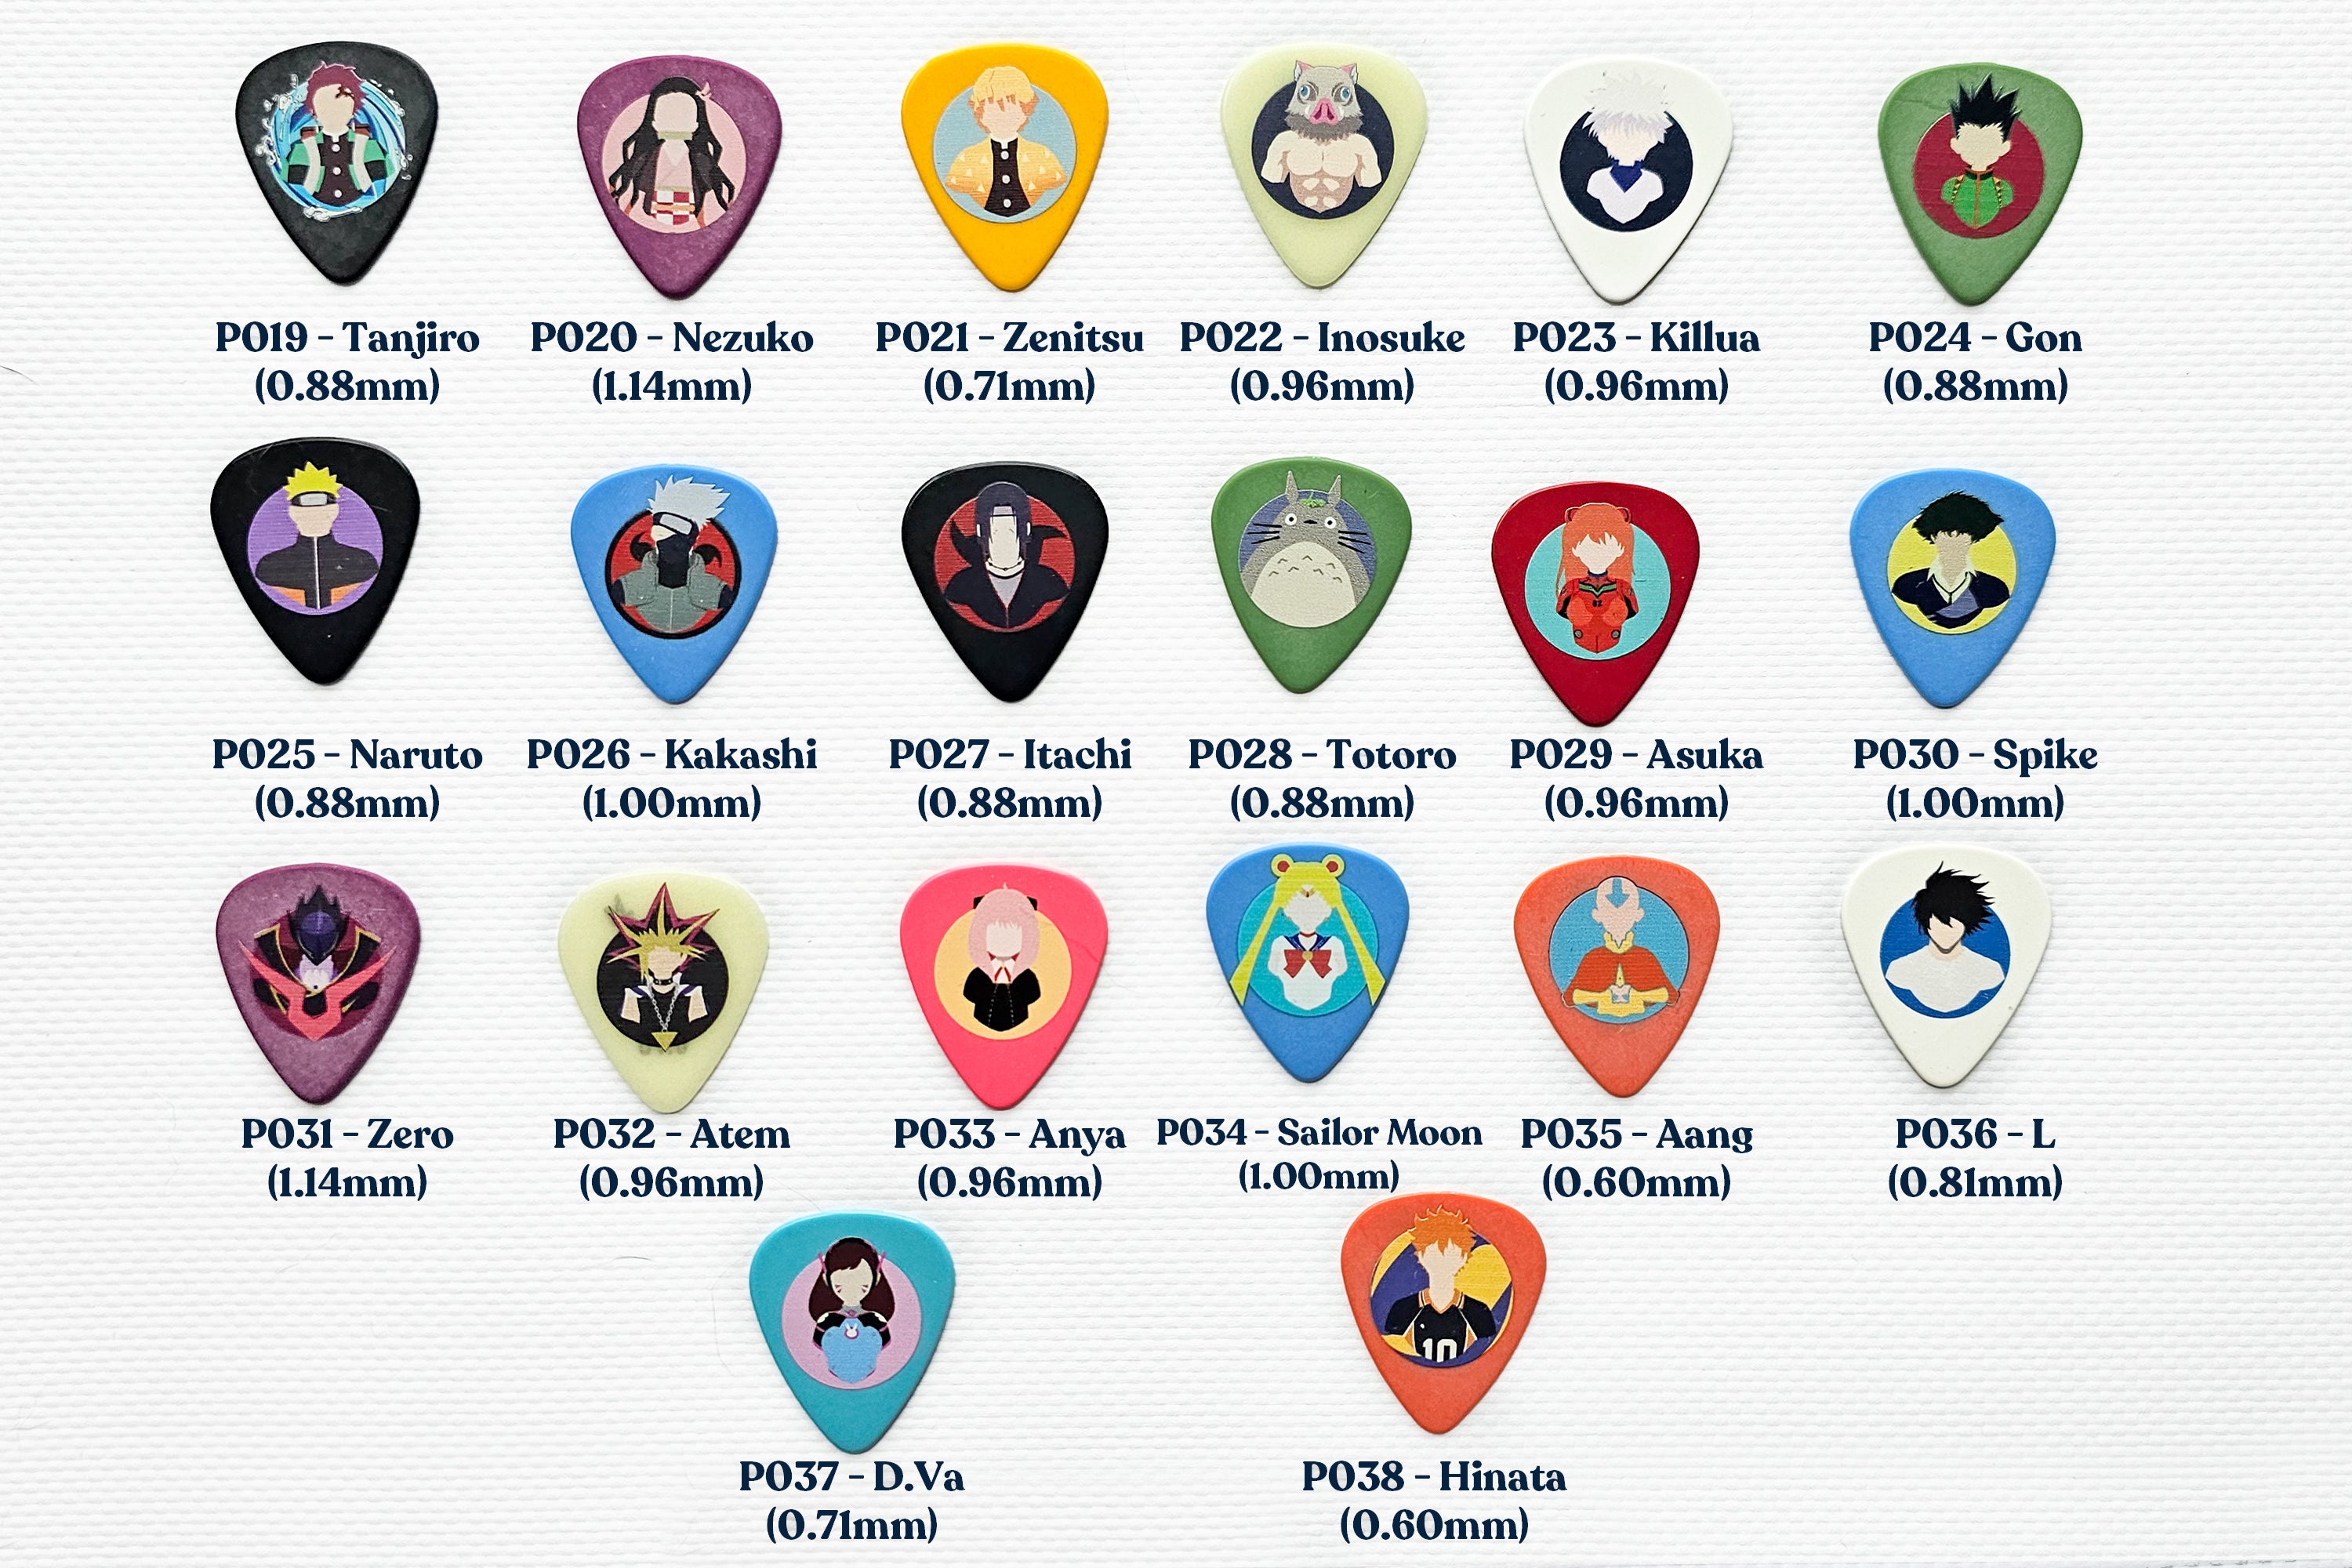 10 Pack of Anime and Pop Culture Guitar Picks